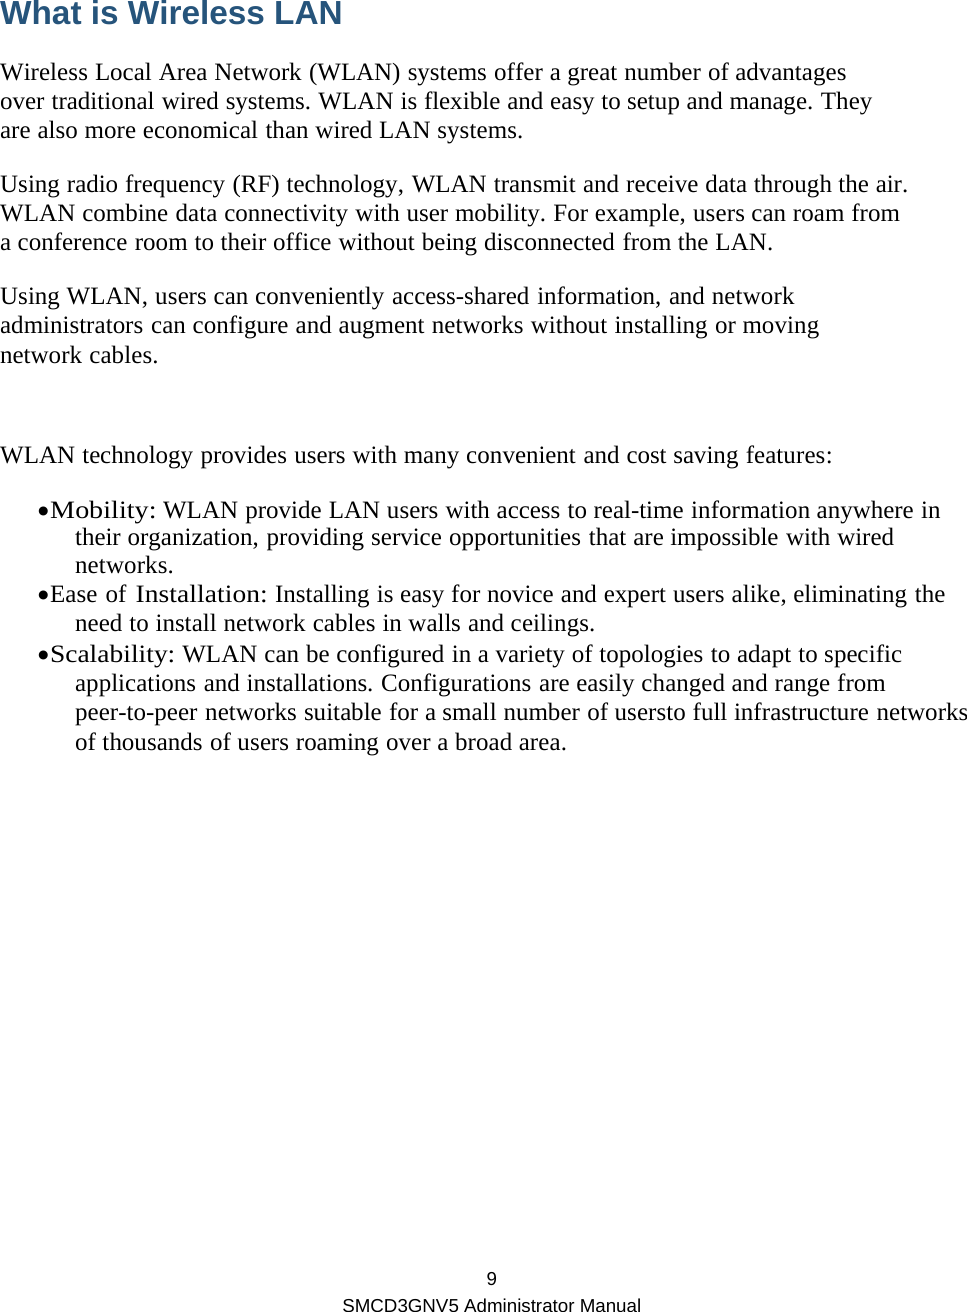  9 SMCD3GNV5 Administrator Manual  What is Wireless LAN Wireless Local Area Network (WLAN) systems offer a great number of advantages over traditional wired systems. WLAN is flexible and easy to setup and manage. They are also more economical than wired LAN systems. Using radio frequency (RF) technology, WLAN transmit and receive data through the air. WLAN combine data connectivity with user mobility. For example, users can roam from a conference room to their office without being disconnected from the LAN. Using WLAN, users can conveniently access-shared information, and network administrators can configure and augment networks without installing or moving network cables.  WLAN technology provides users with many convenient and cost saving features: • Mobility: WLAN provide LAN users with access to real-time information anywhere in their organization, providing service opportunities that are impossible with wired networks. • Ease of Installation: Installing is easy for novice and expert users alike, eliminating the need to install network cables in walls and ceilings. • Scalability: WLAN can be configured in a variety of topologies to adapt to specific applications and installations. Configurations are easily changed and range from peer-to-peer networks suitable for a small number of usersto full infrastructure networks of thousands of users roaming over a broad area.  